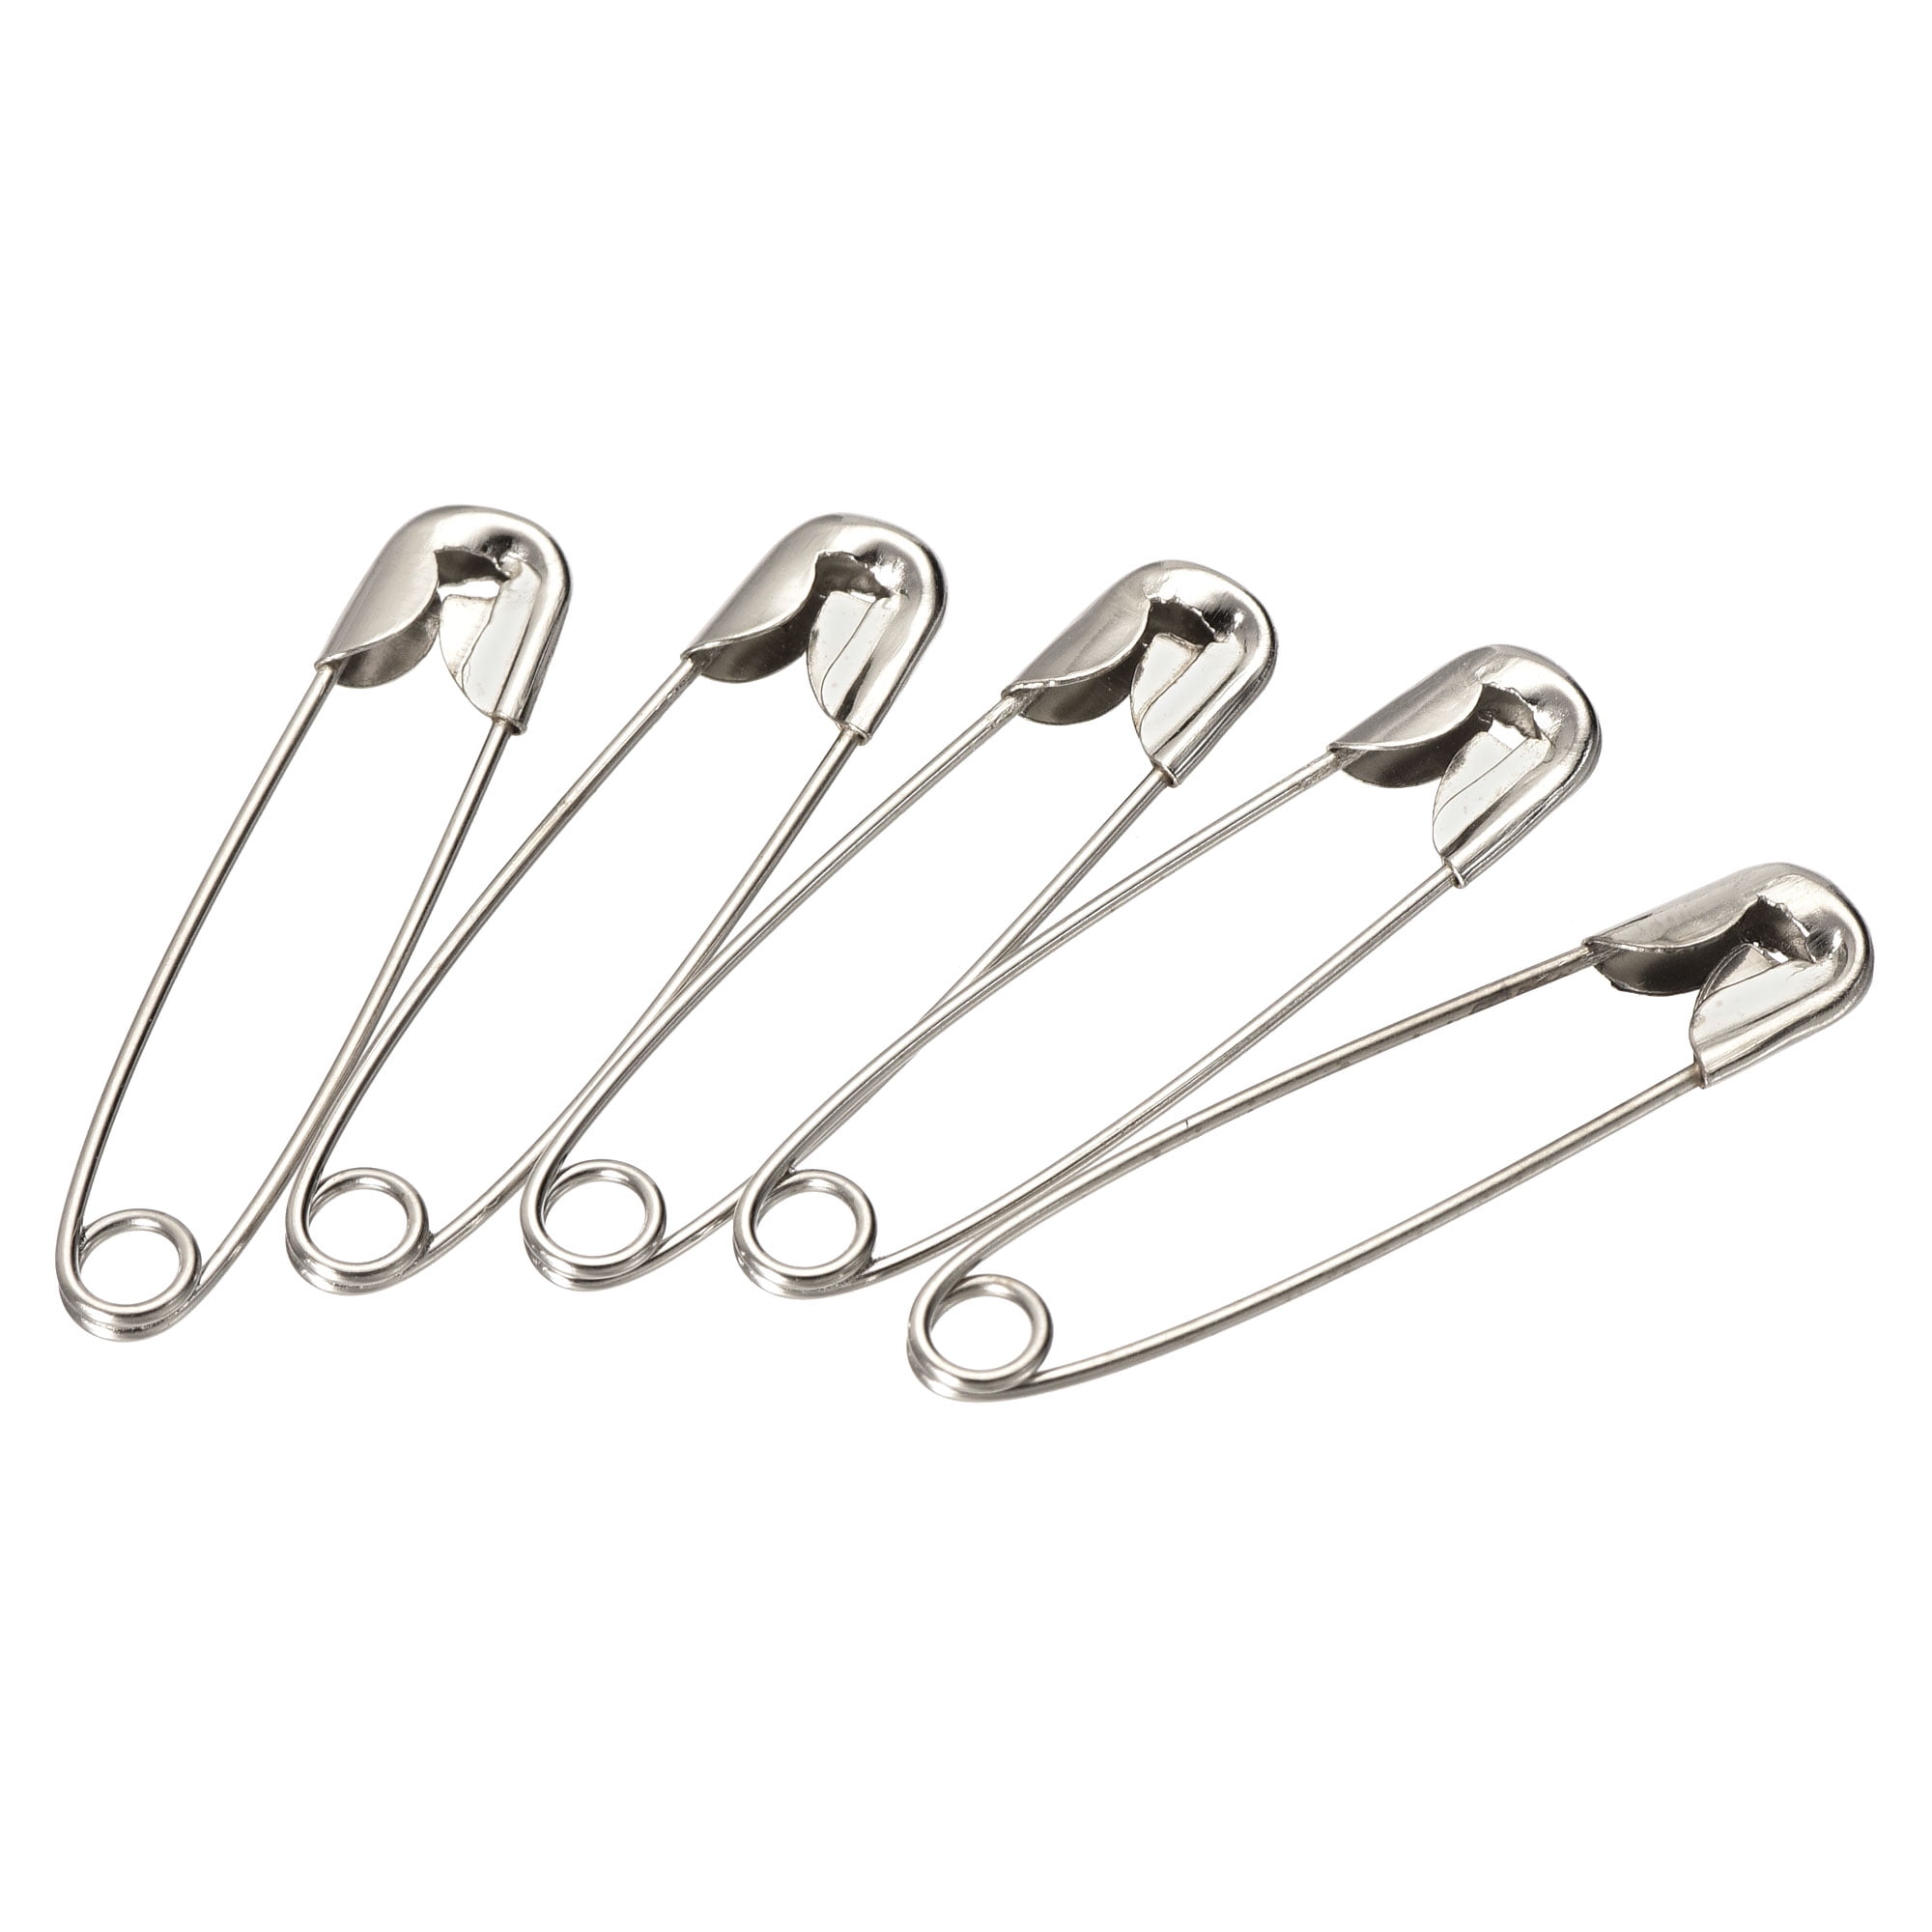 100pcs Silver Large Safety Pins Needles Assorted Clothes Sewing Craft  Jewelry